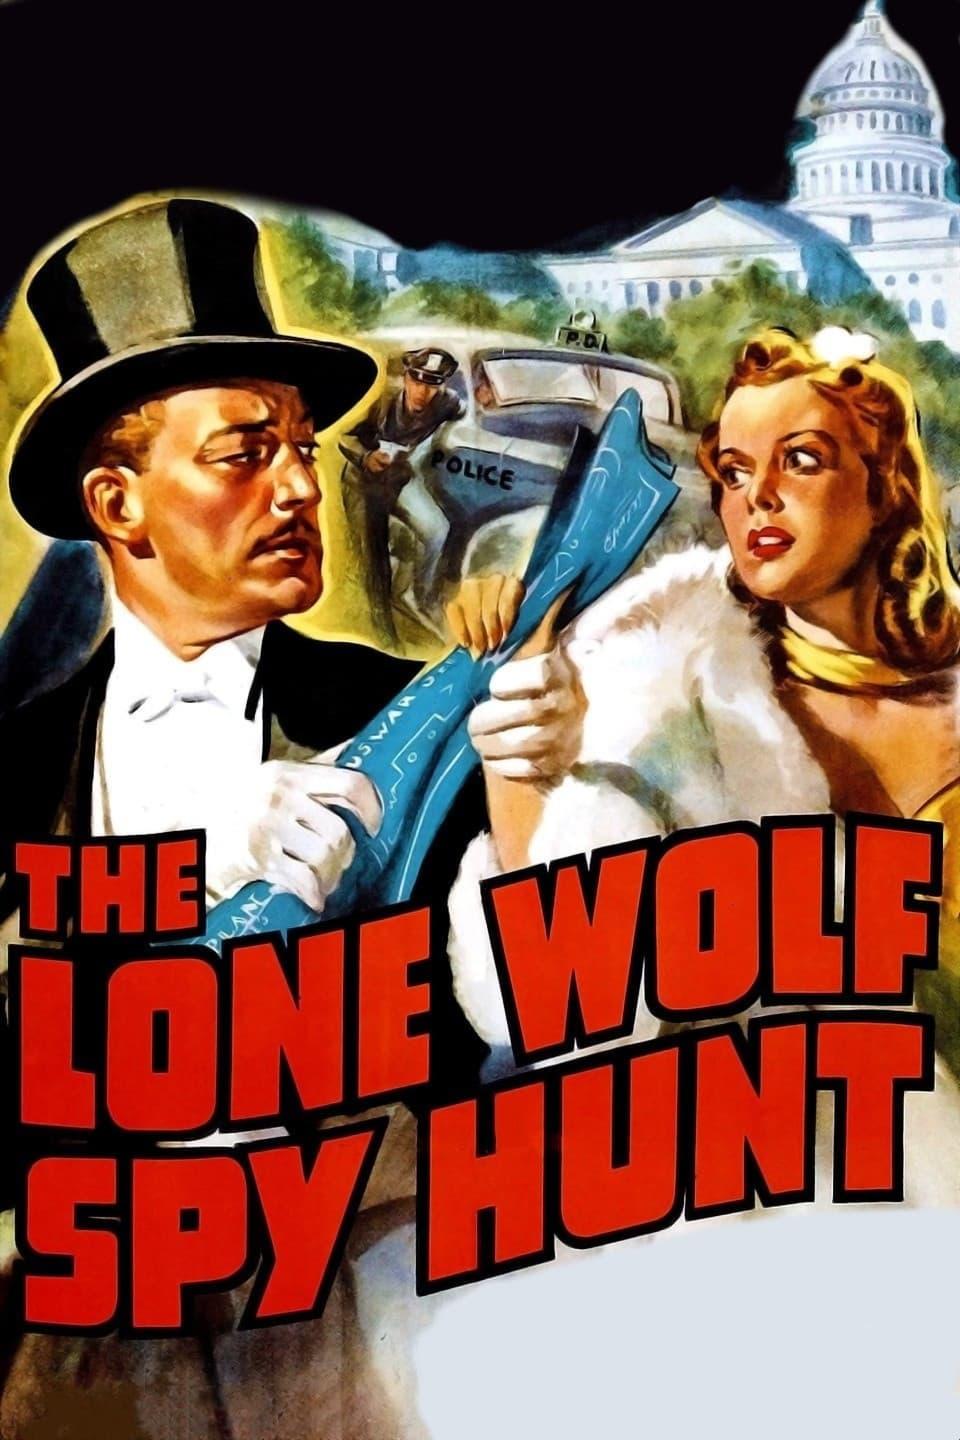 The Lone Wolf Spy Hunt poster